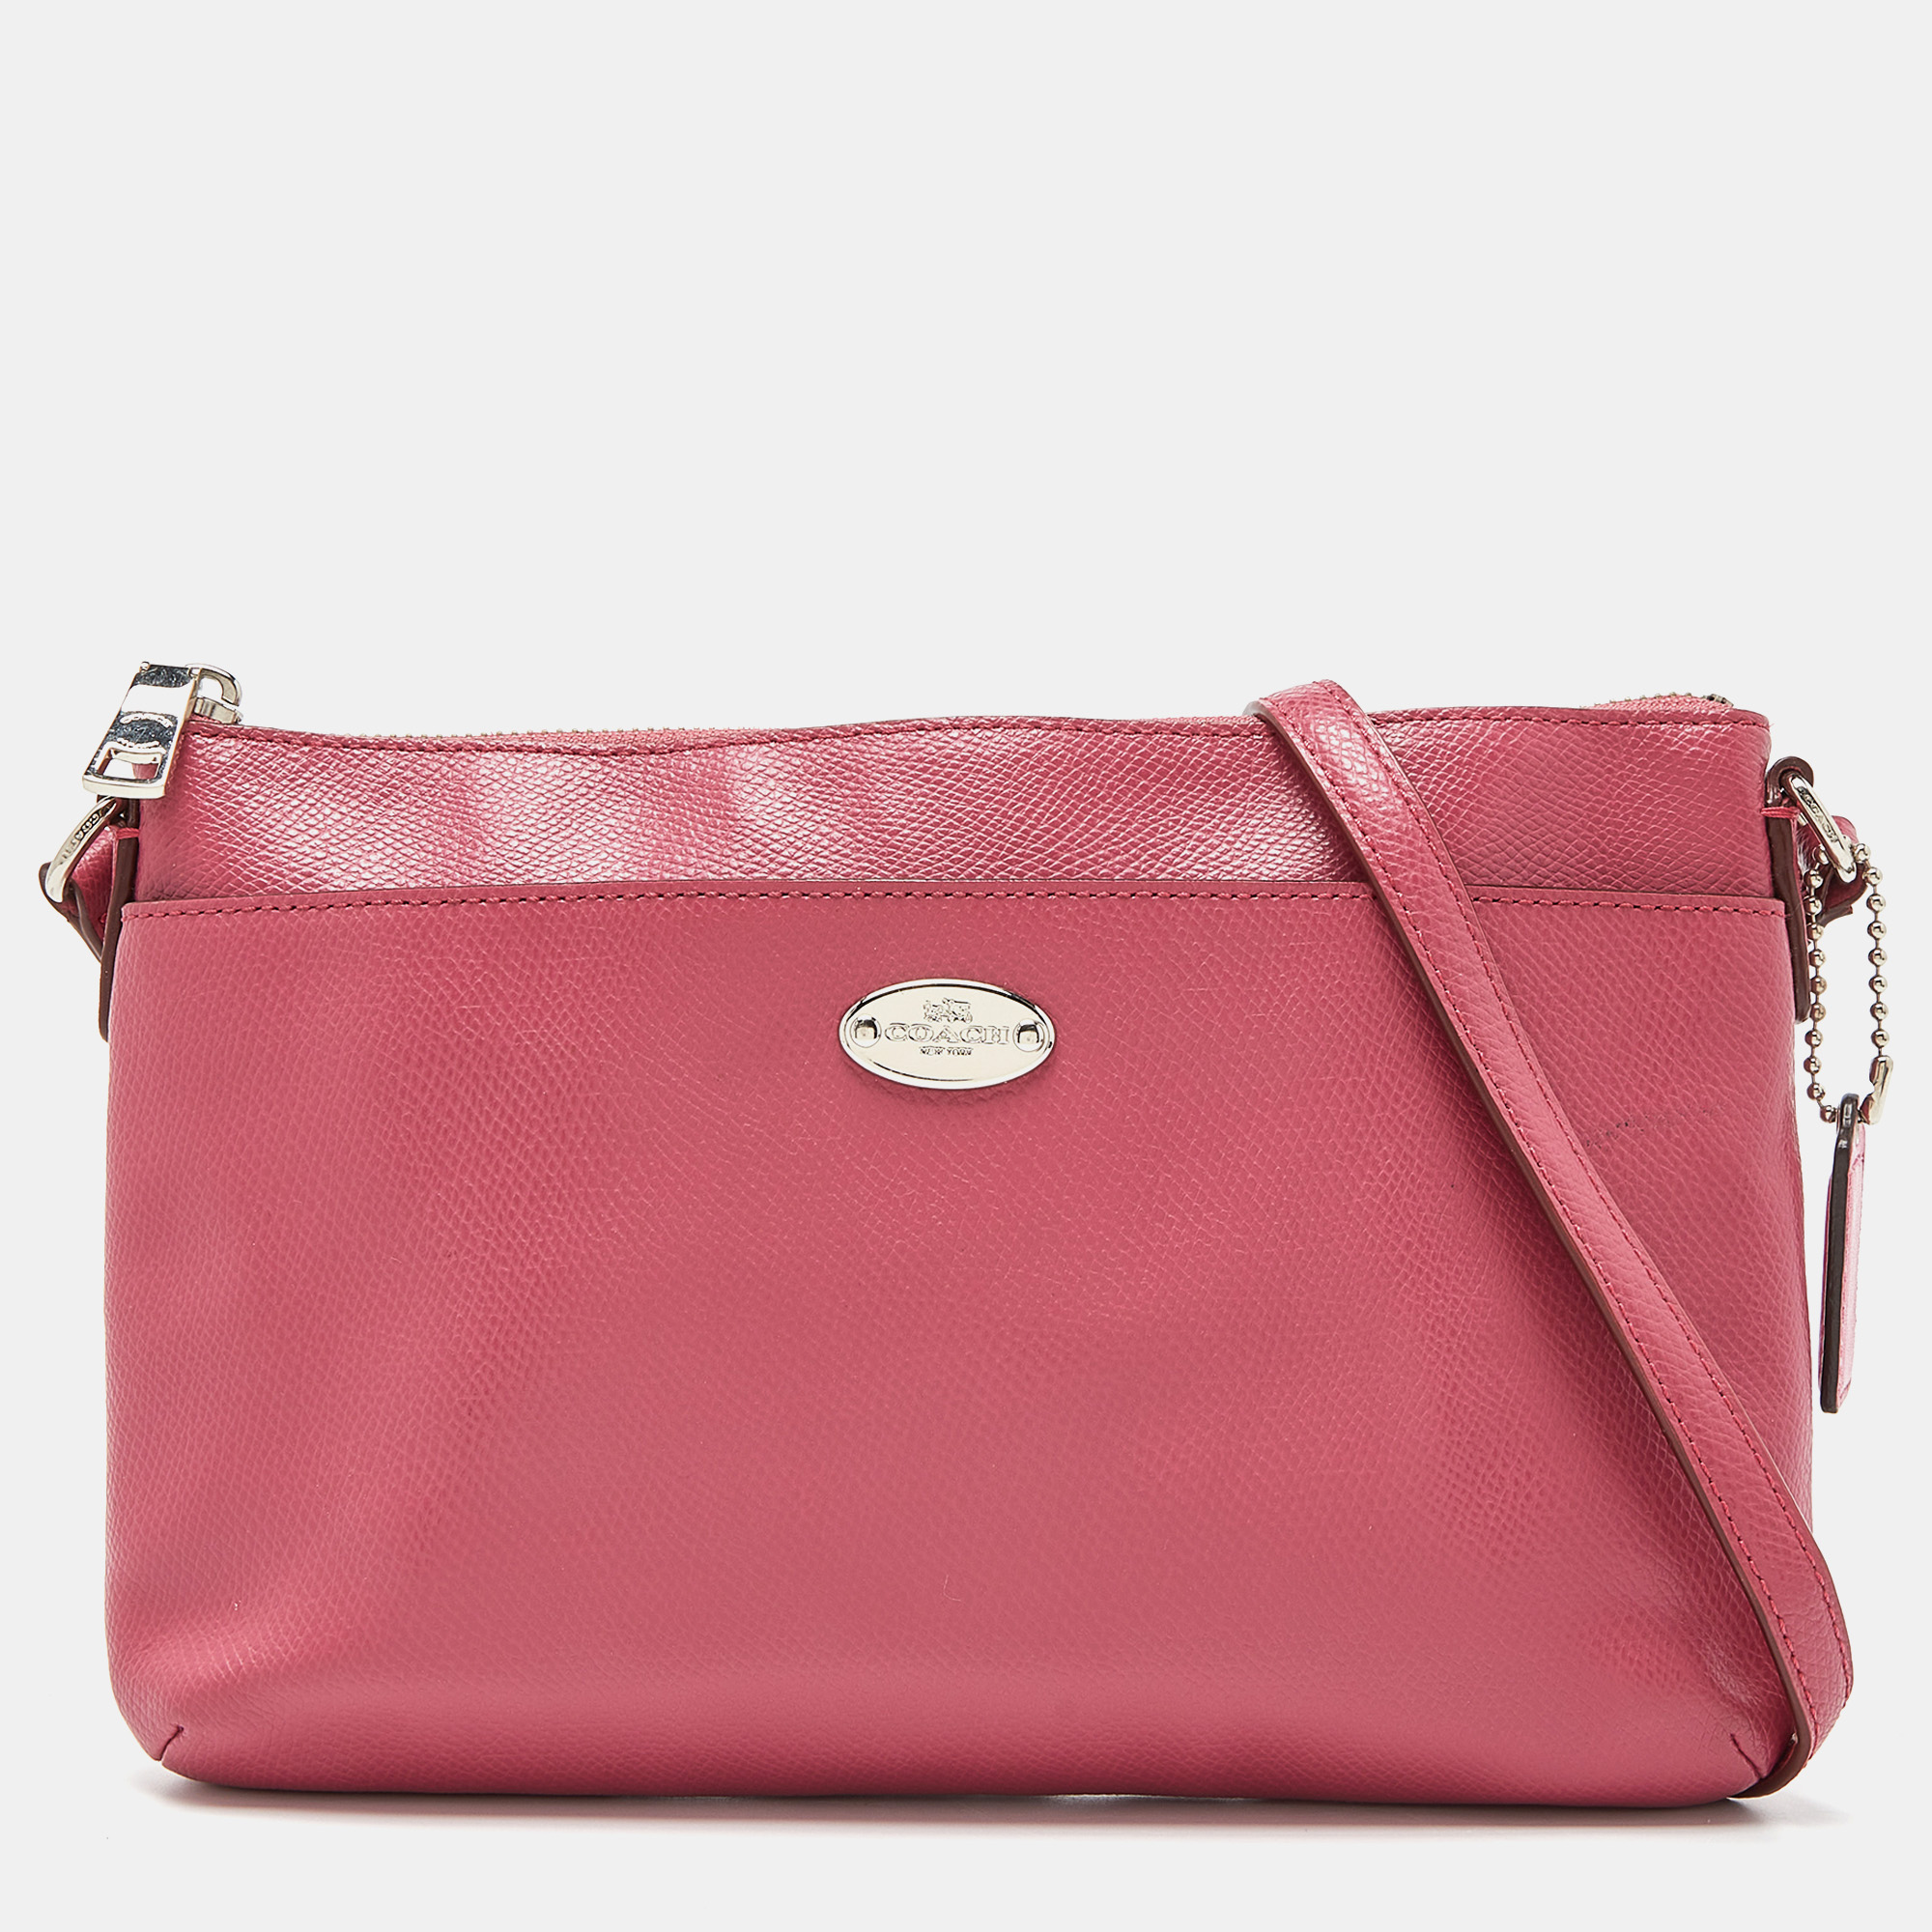 Coach Pink Leather Pop Up Pouch Crossbody Bag